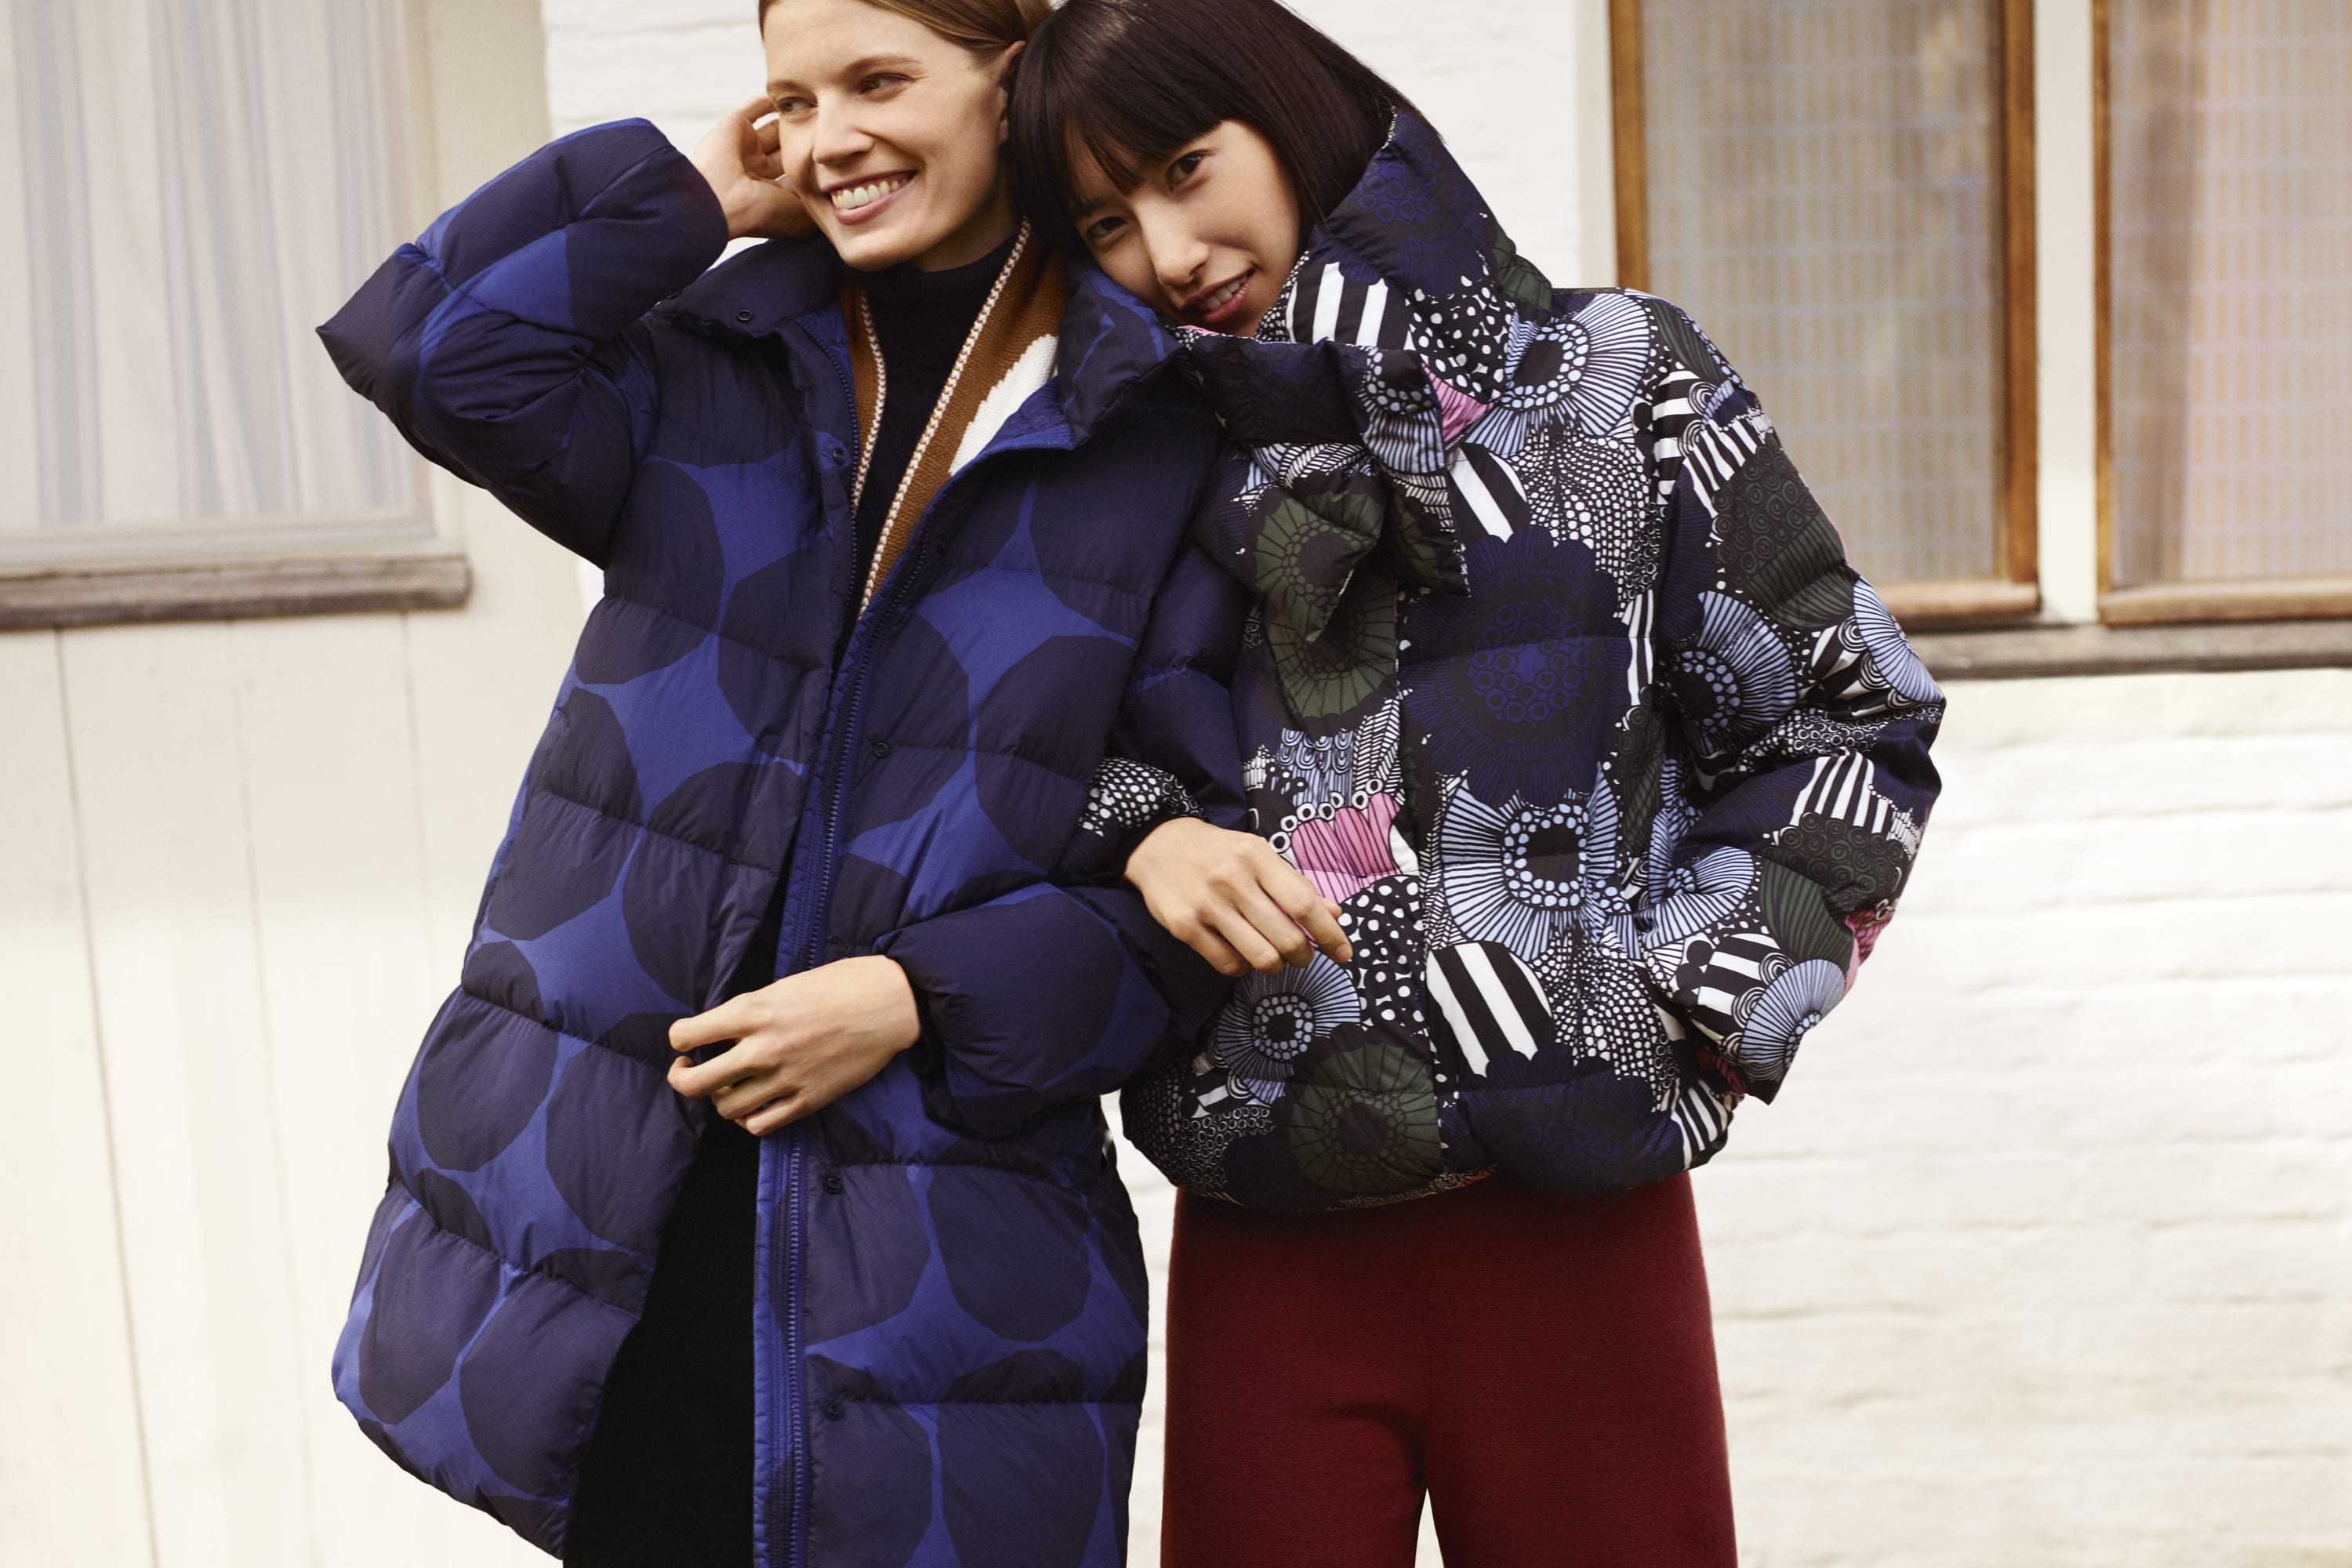 eiland hoed Republikeinse partij 22 Pieces You Need From Uniqlo's Second Collaboration With Marimekko -  FASHION Magazine